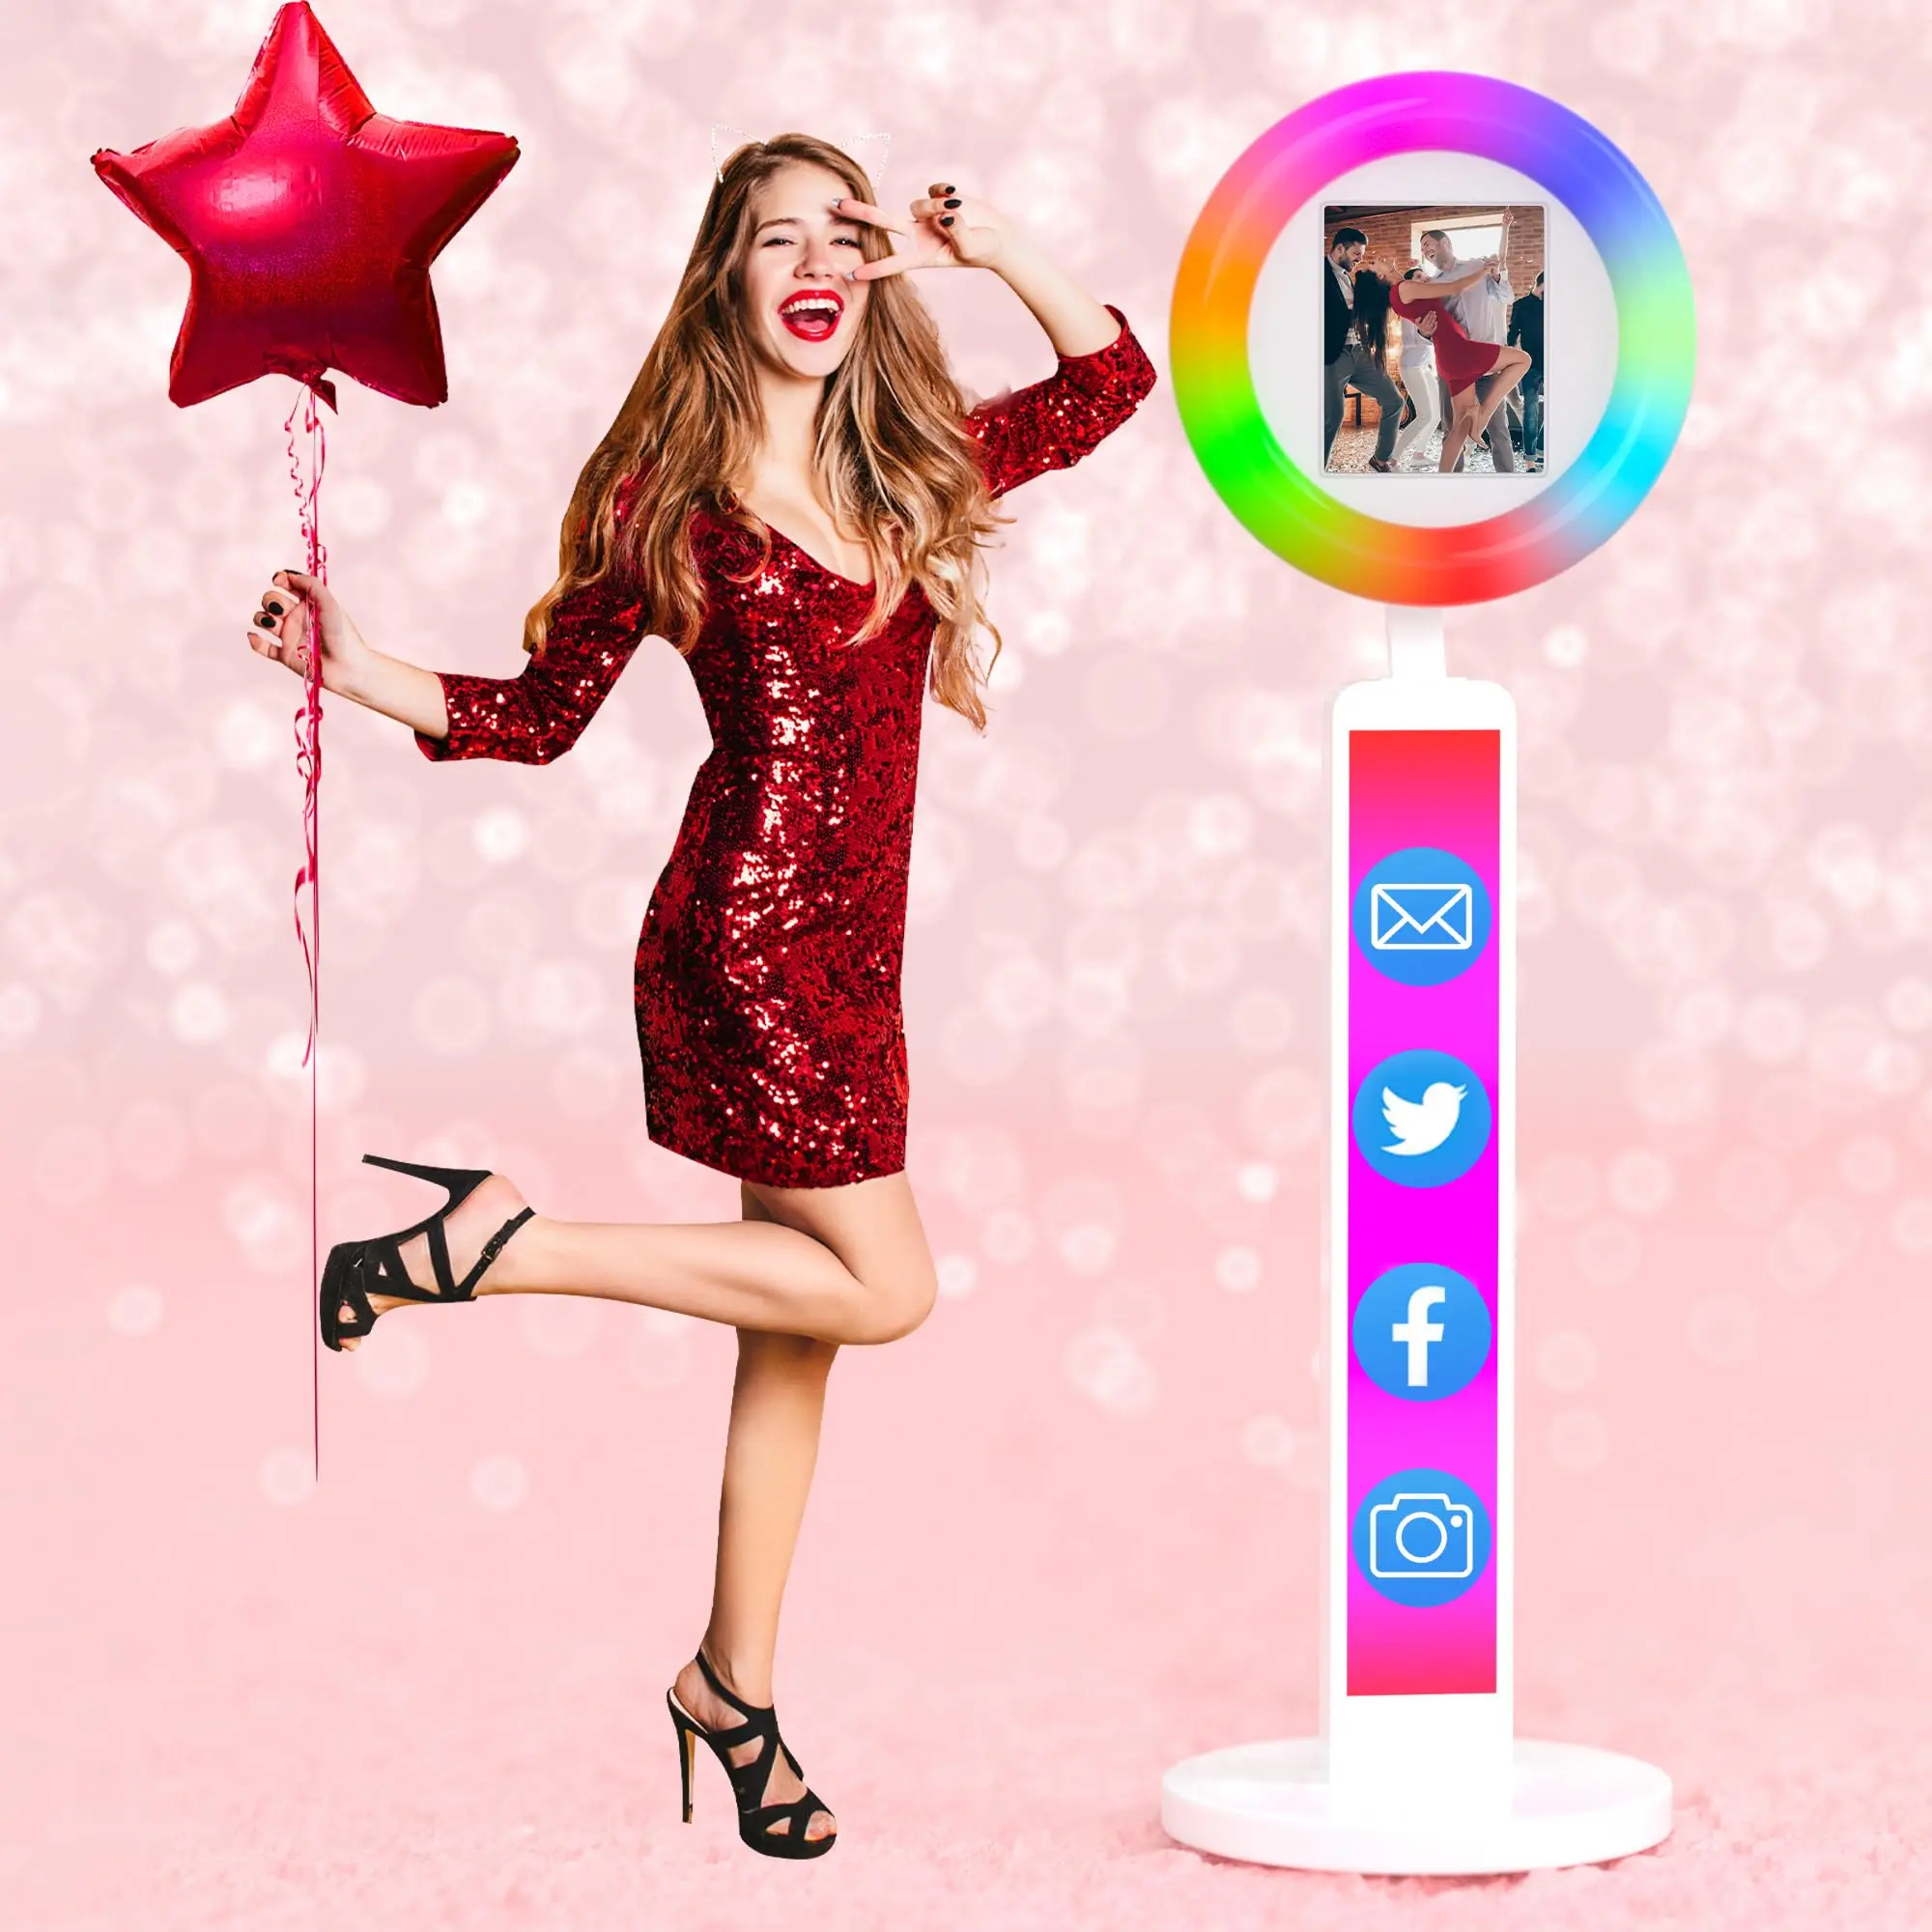 

Ipad Photo Booth Shell Selfie Photobooth Machine Wedding for Ipad Photo Booth Stand For Weddings Parties Events With APP